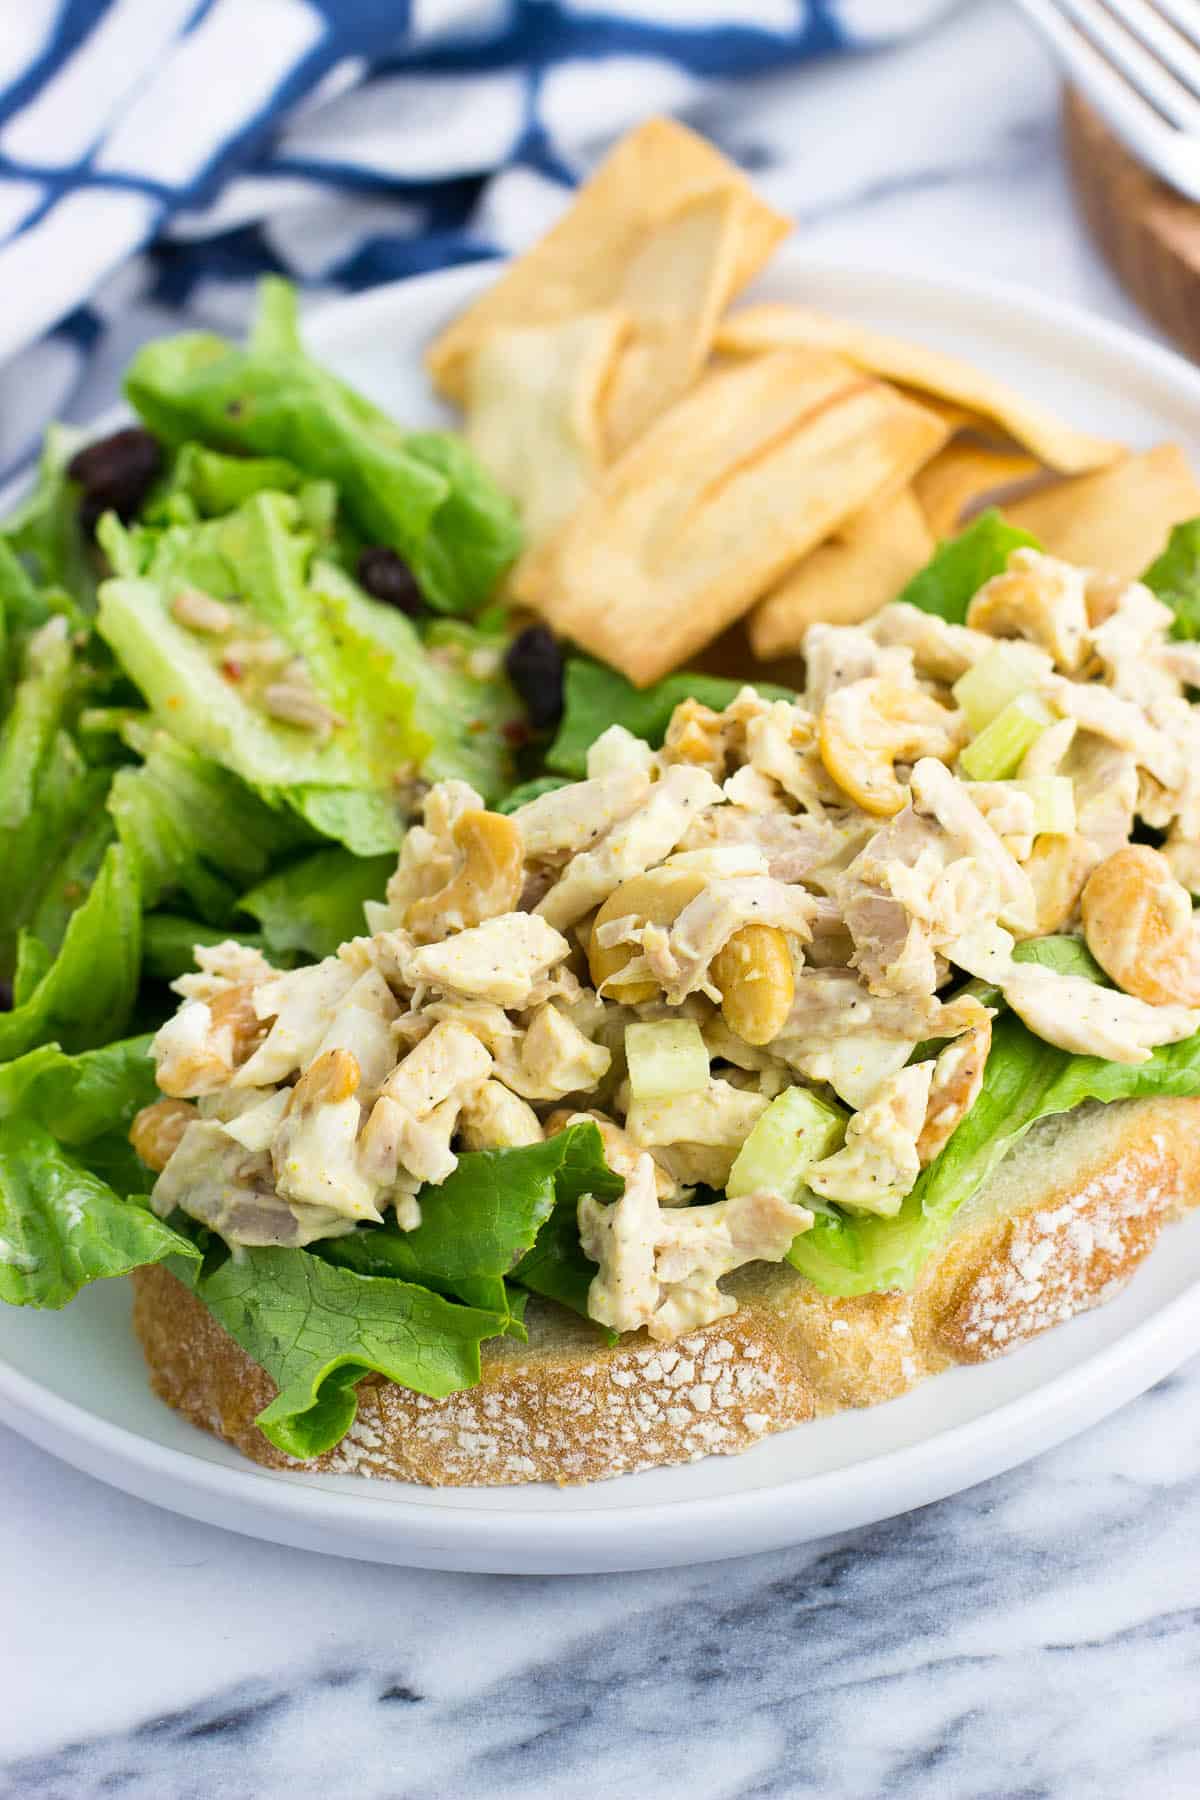 An open-face chicken salad sandwich on a plate with a side salad and pita chips